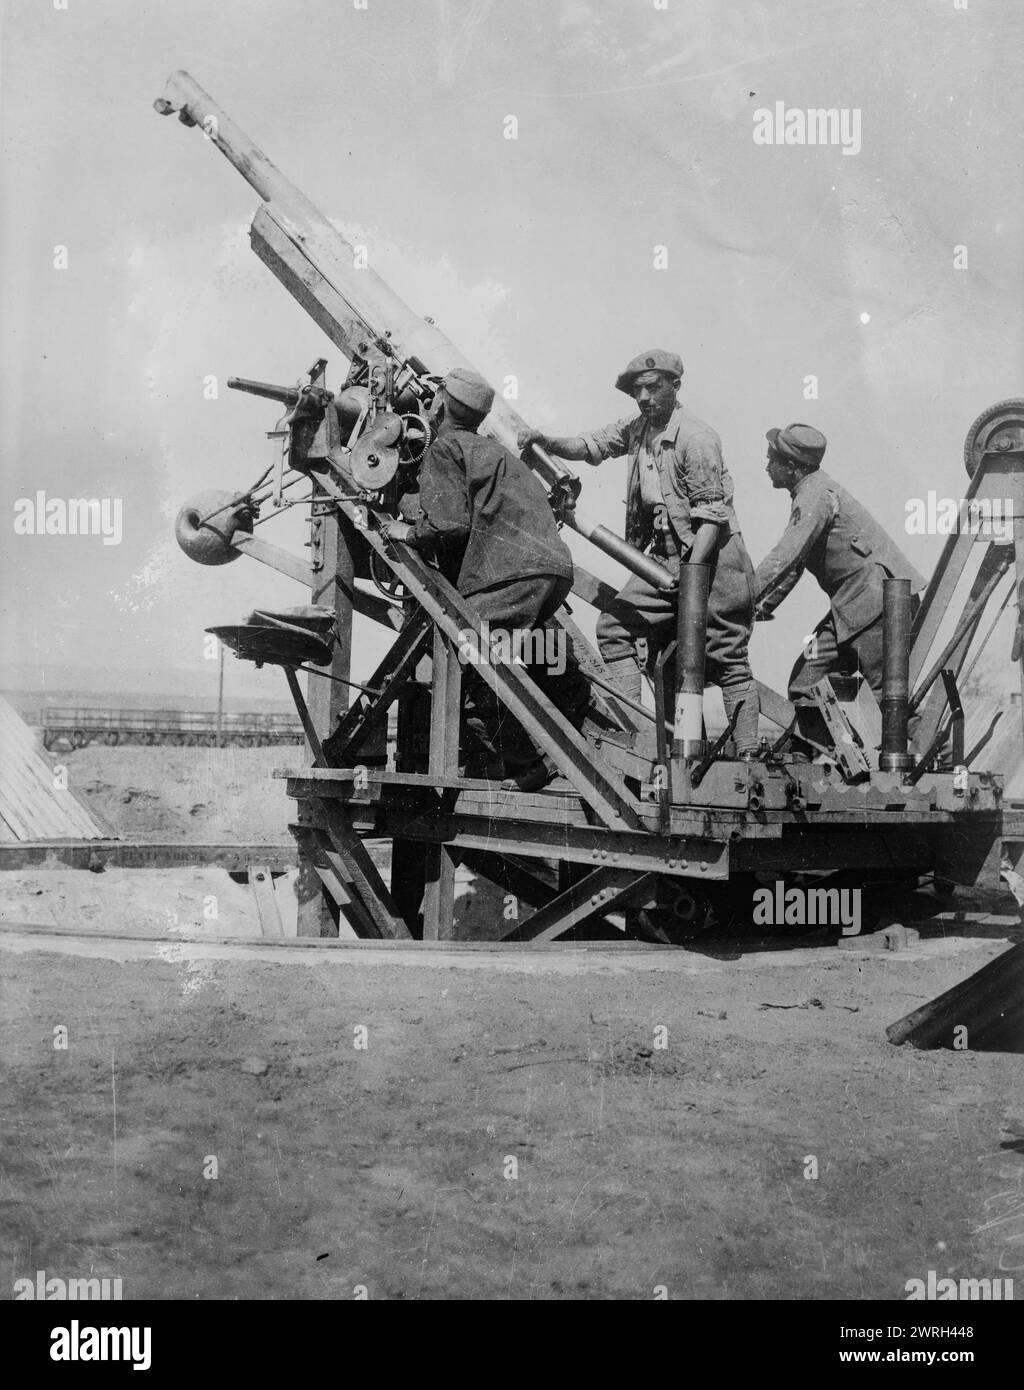 Latest French anti-aircraft gun, 1917 29 Nov 1917. A French 75mm field gun which has been mounted for use as an anti-aircraft weapon, during the Salonika Campaign during World War I. Stock Photo